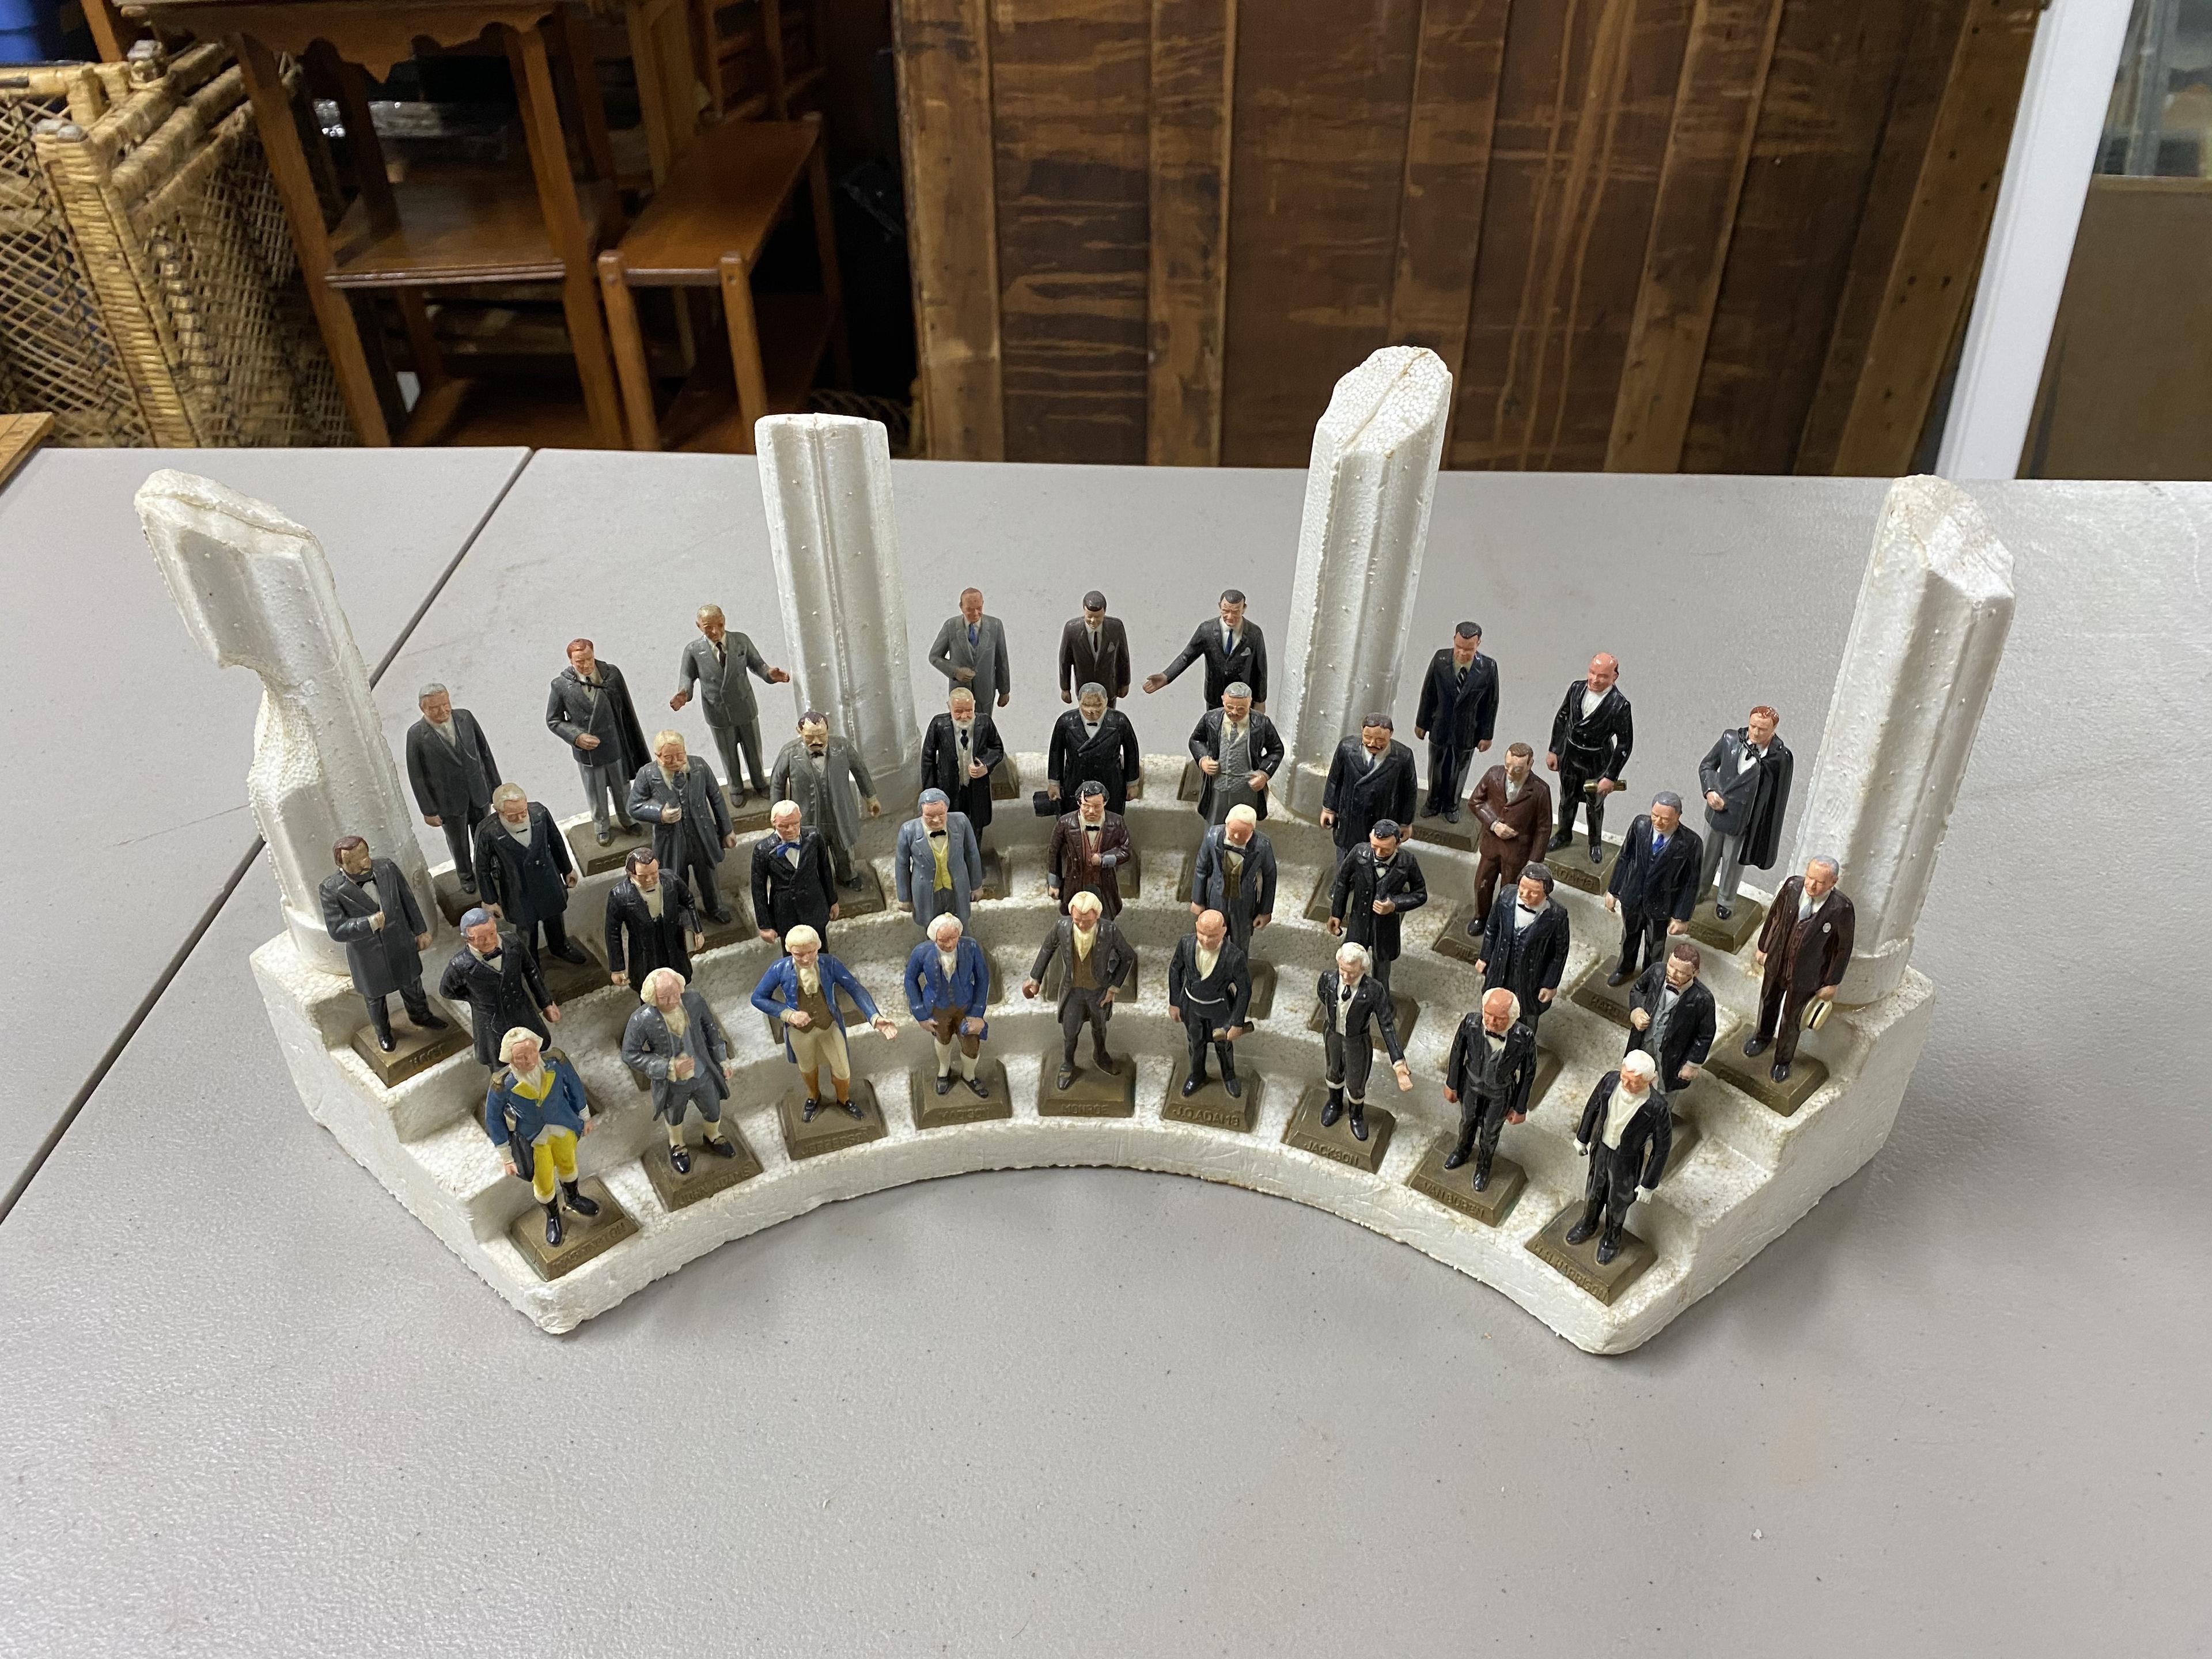 Presidents of the US display